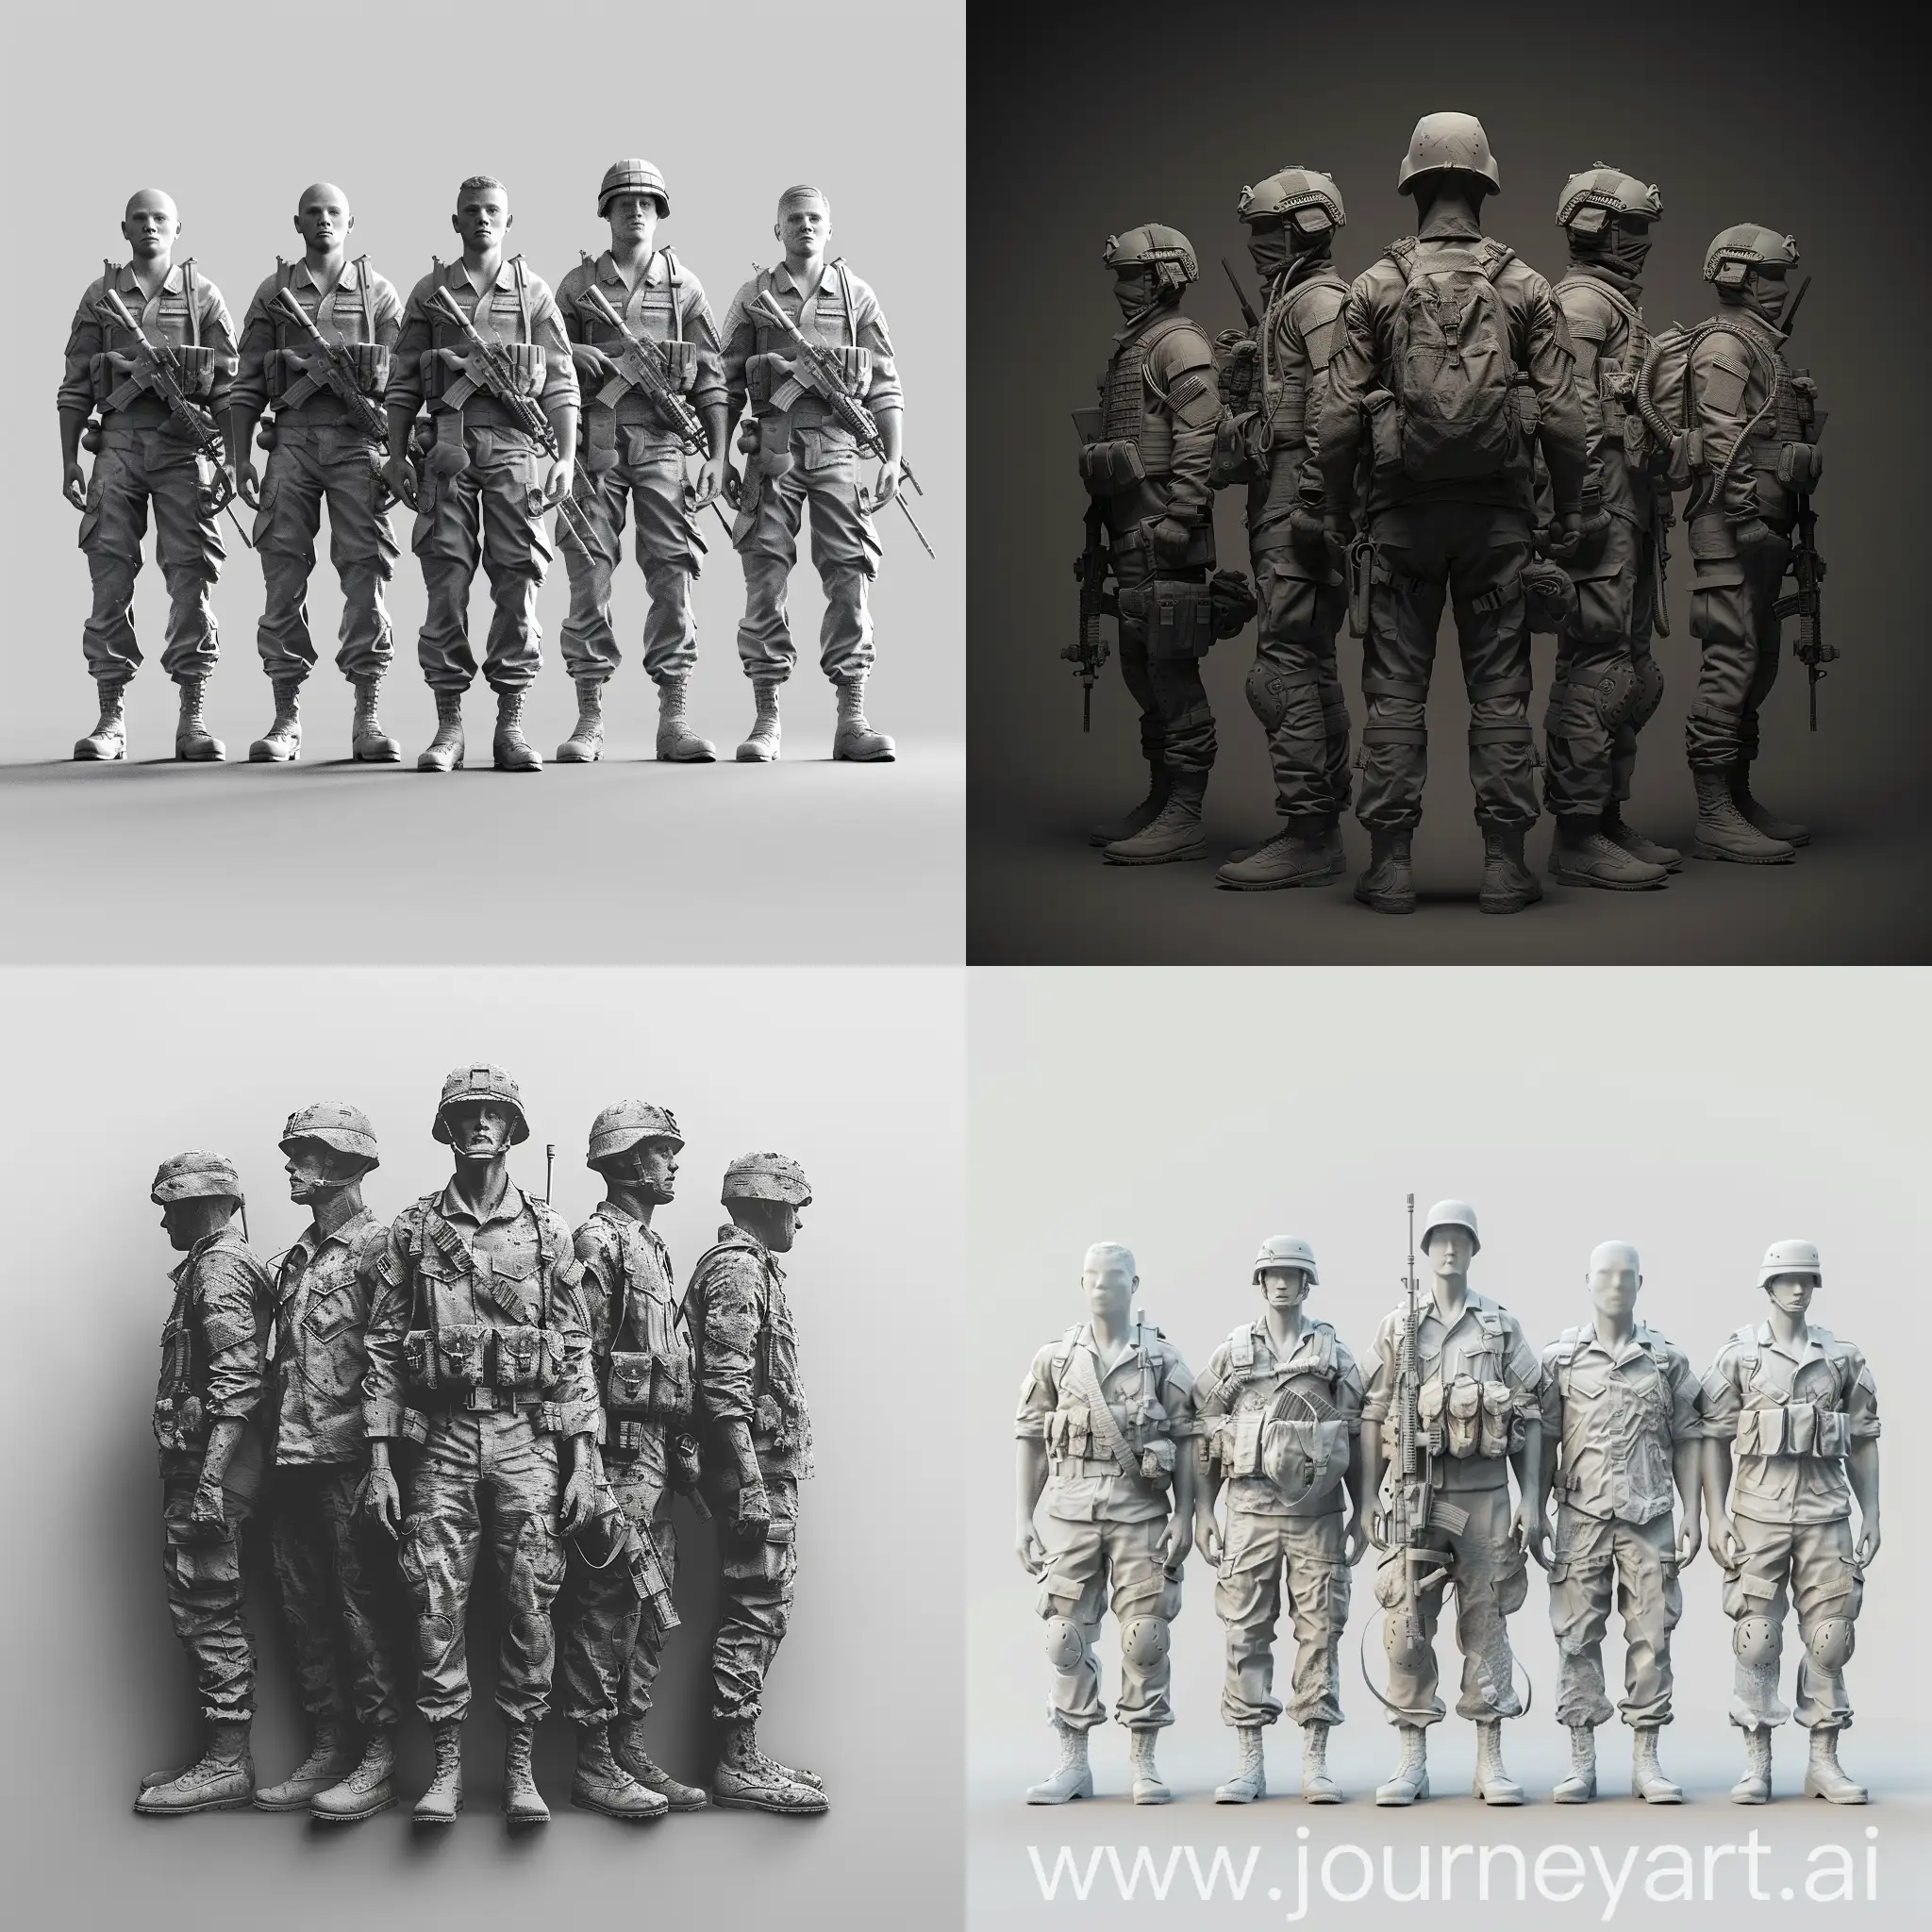 I would like to request a 3D image of five unarmed soldiers. The image should be realistic and detailed, and show no weapons. The purpose of the image is to design a poster